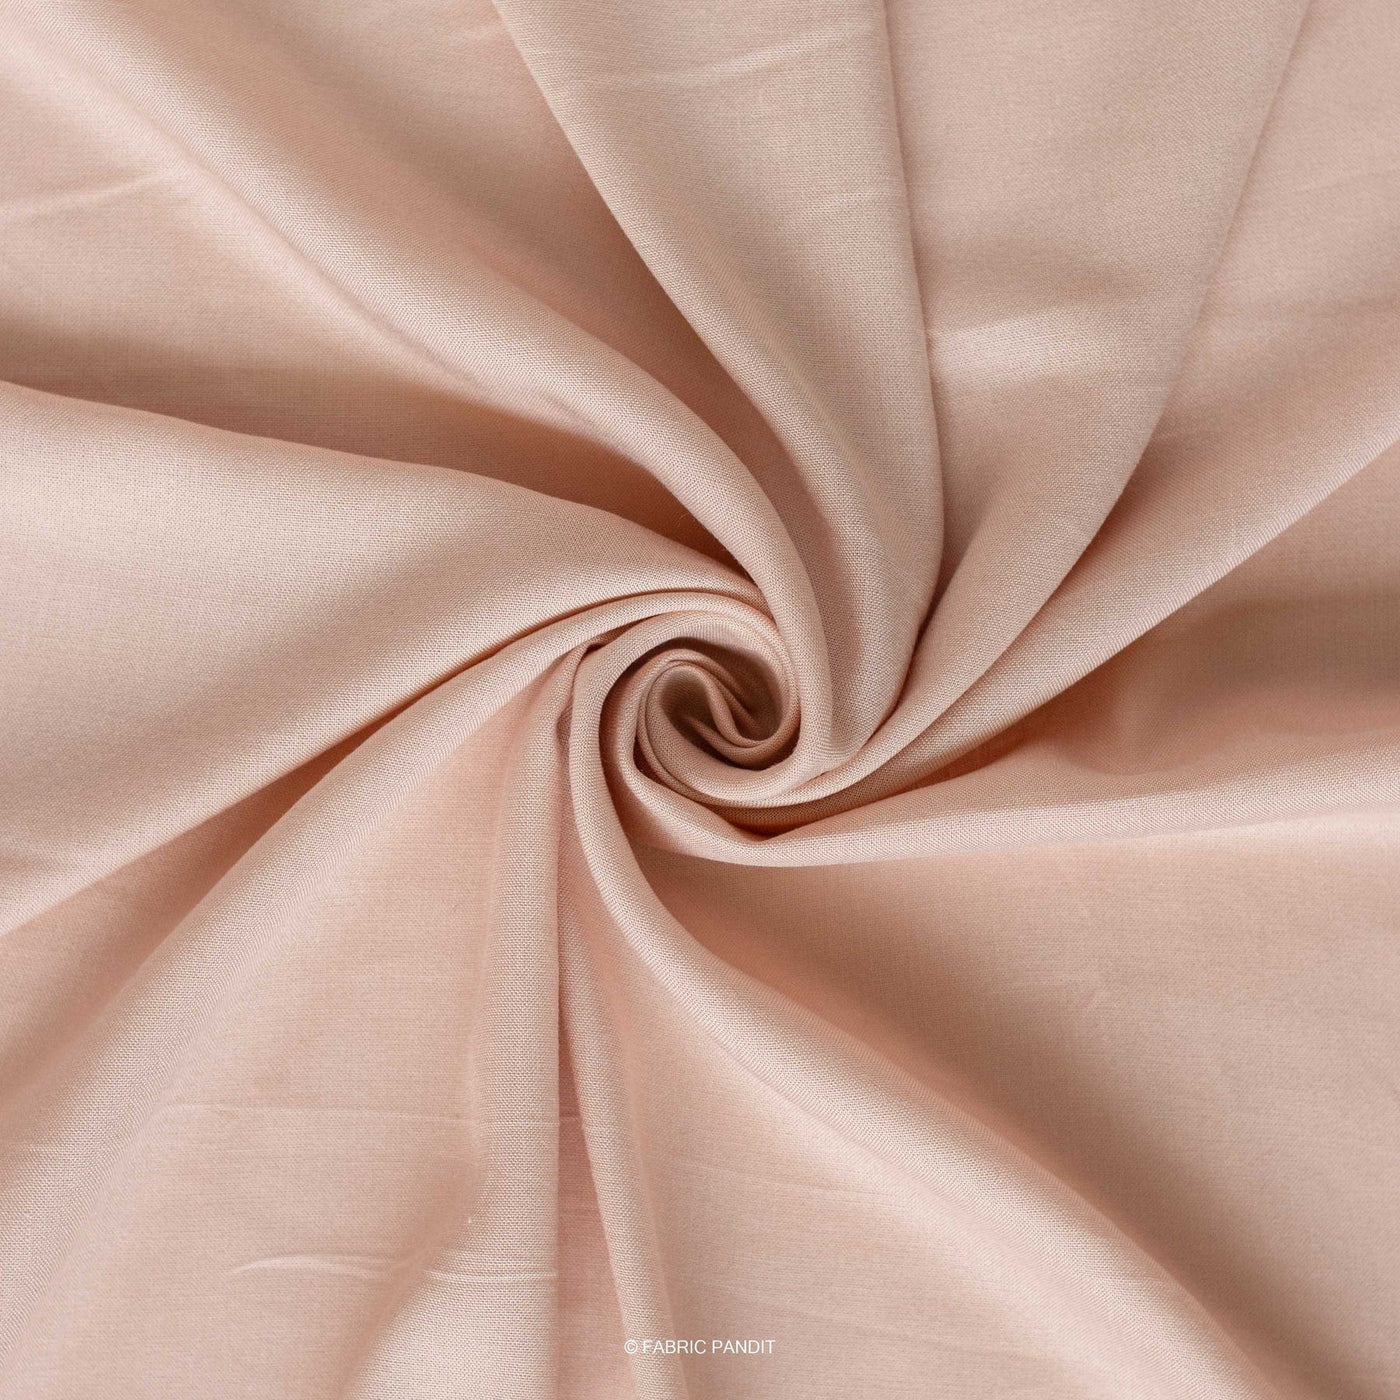 Fabric Pandit Fabric Oyster Pink Color Pure Rayon Fabric (42 Inches)